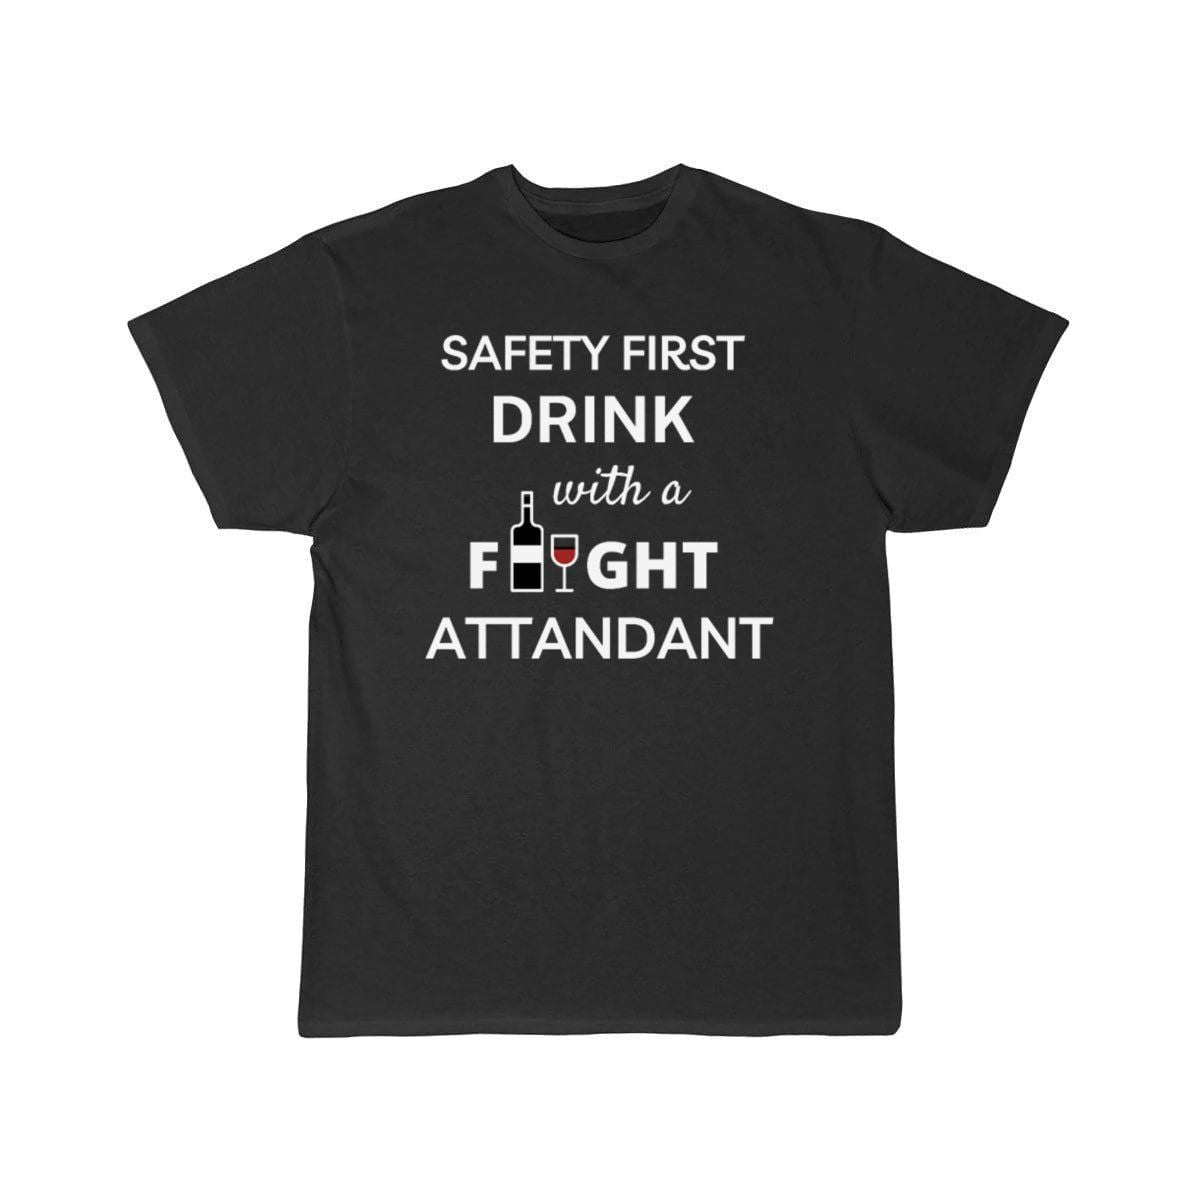 Safety First Drink With a Flight Attendant T-SHIRT THE AV8R